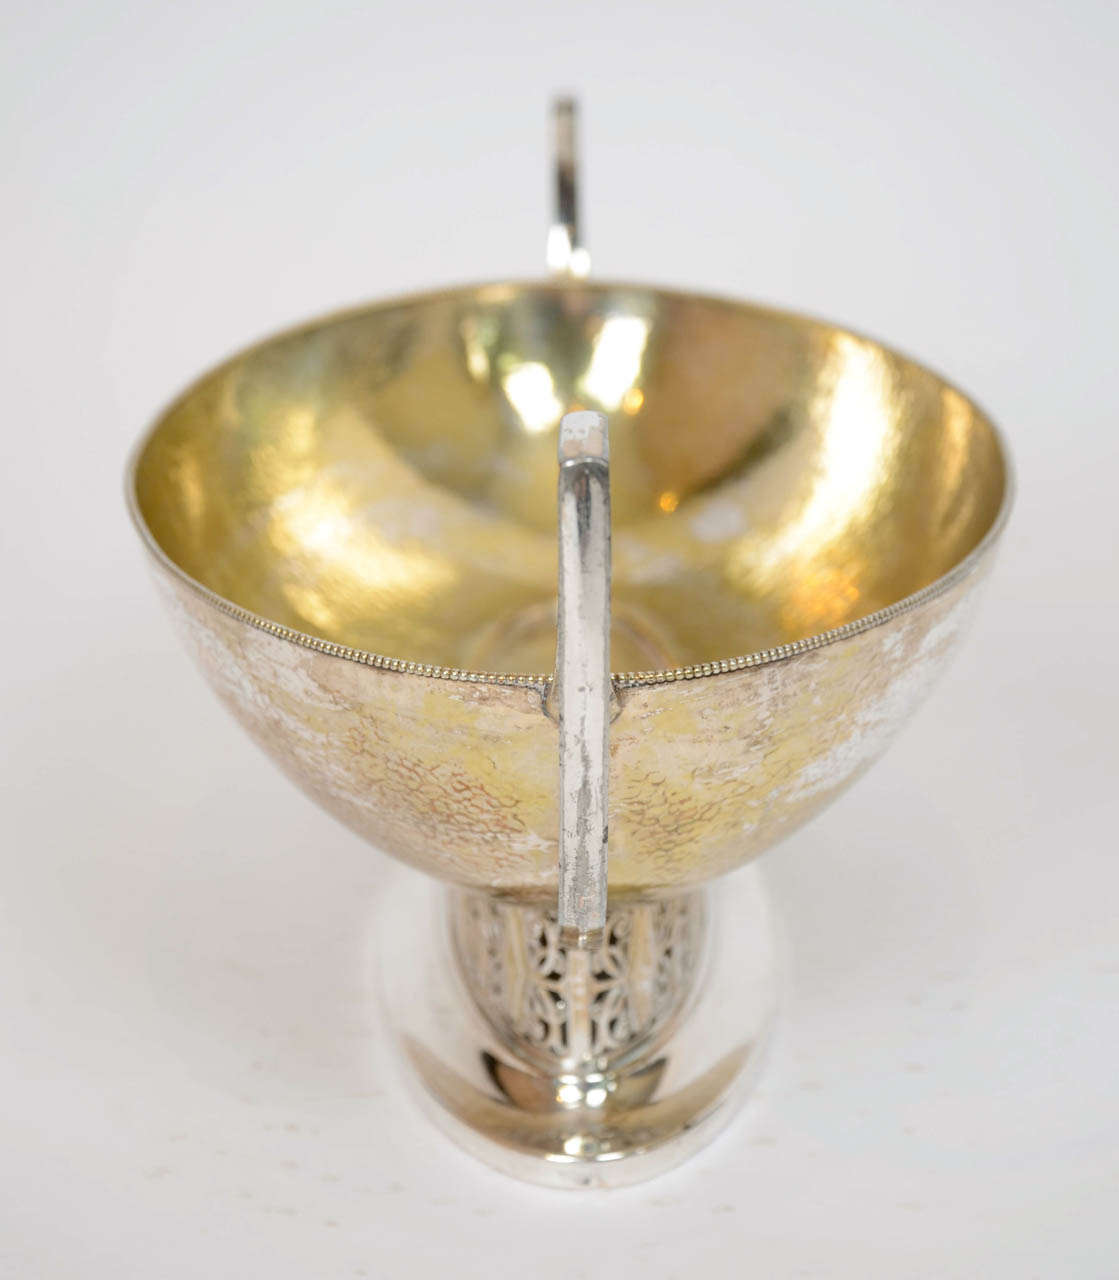 WMF Silver Plated Hammered Bowl For Sale at 1stdibs